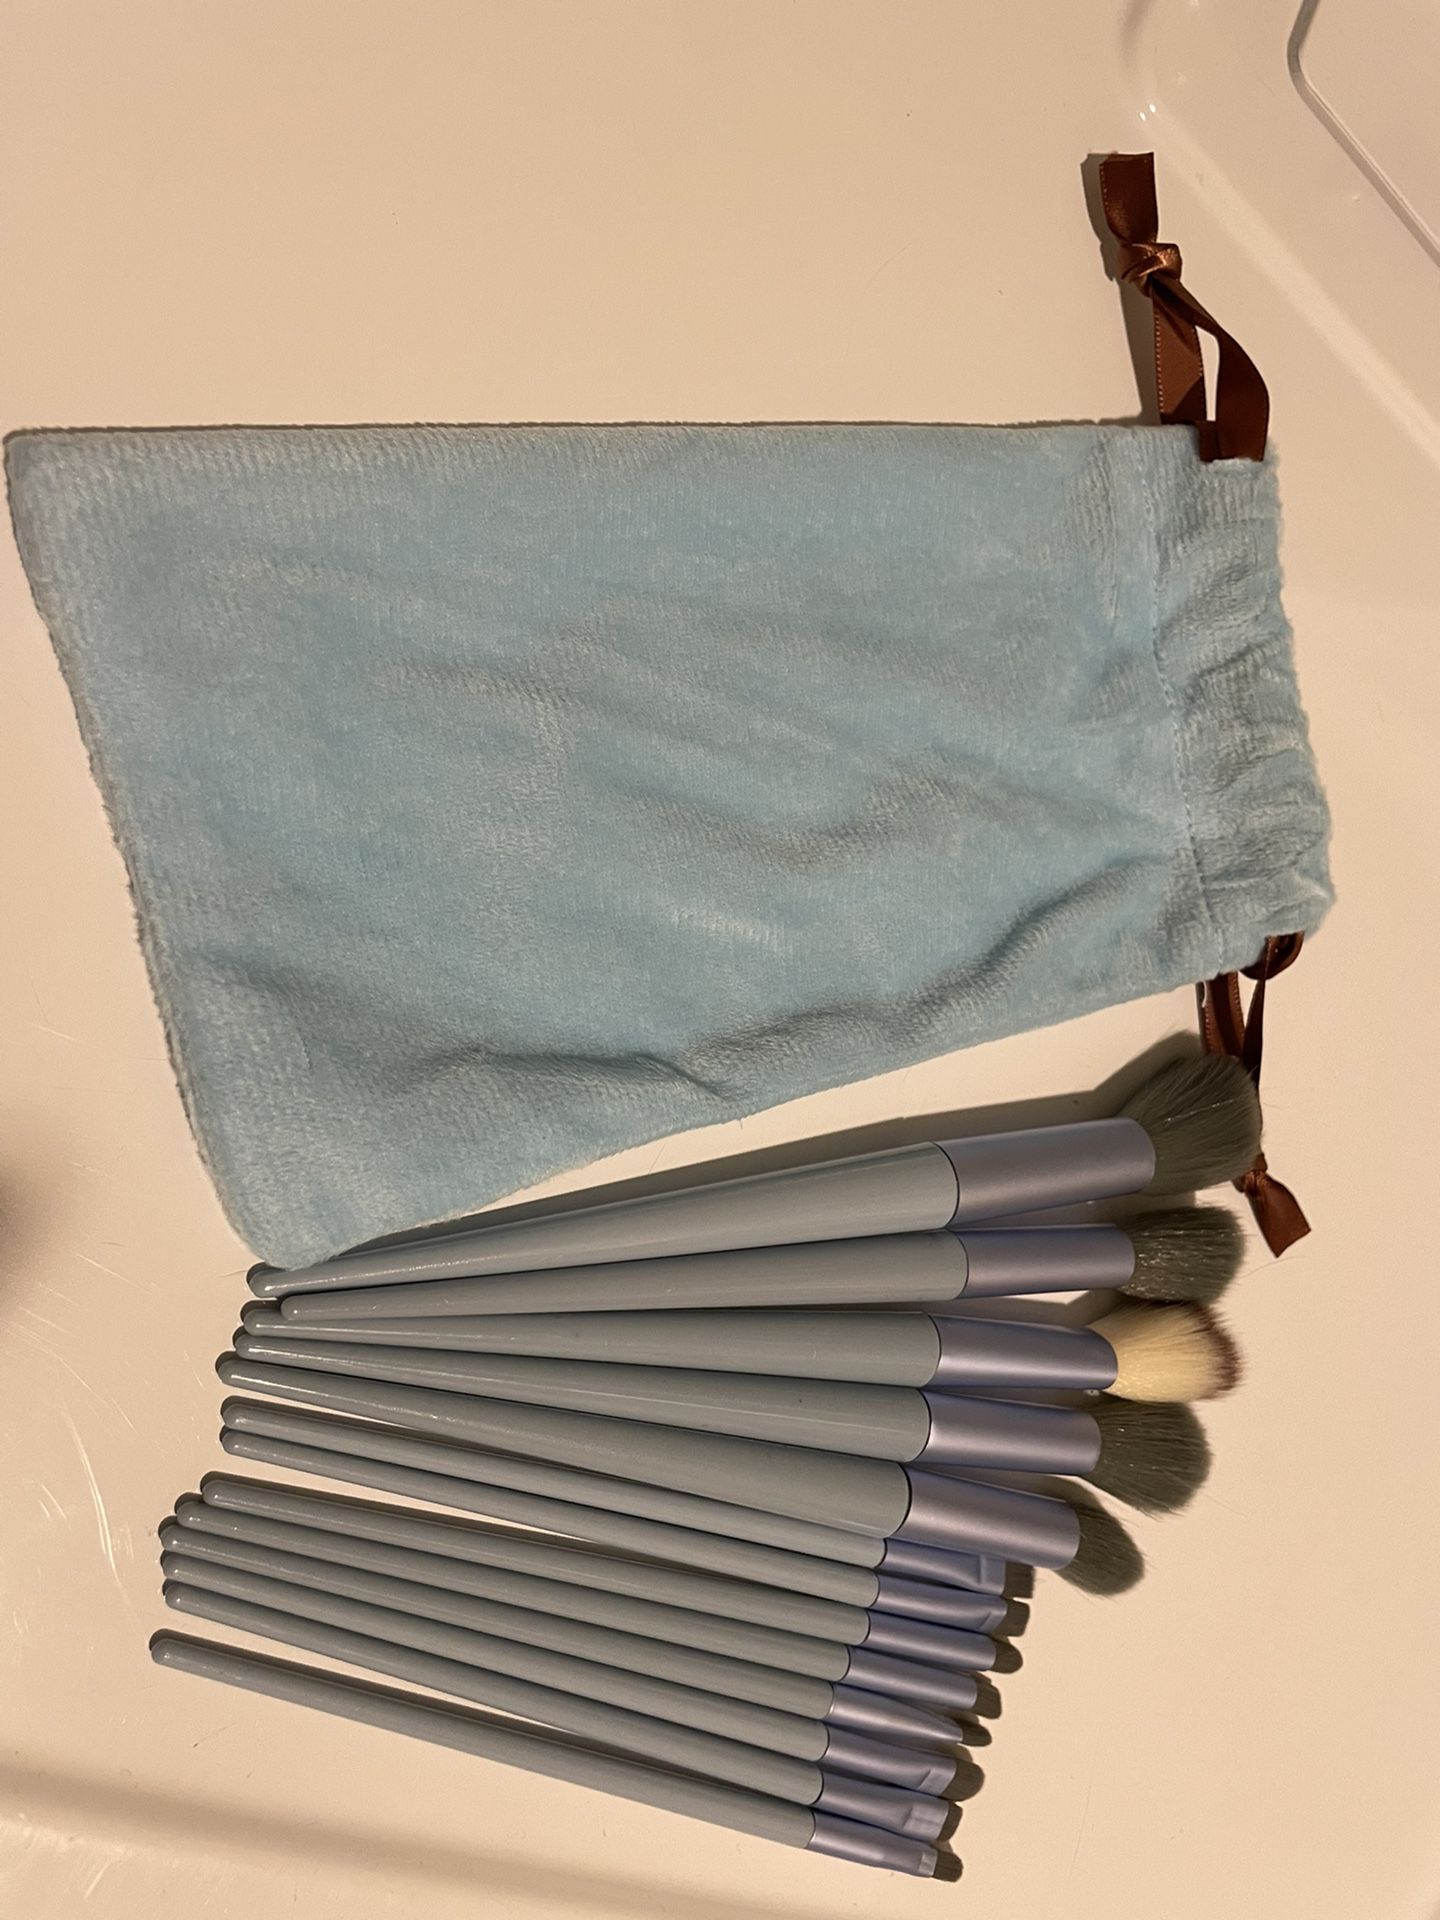 Make Up Brushes With Bag! (12)